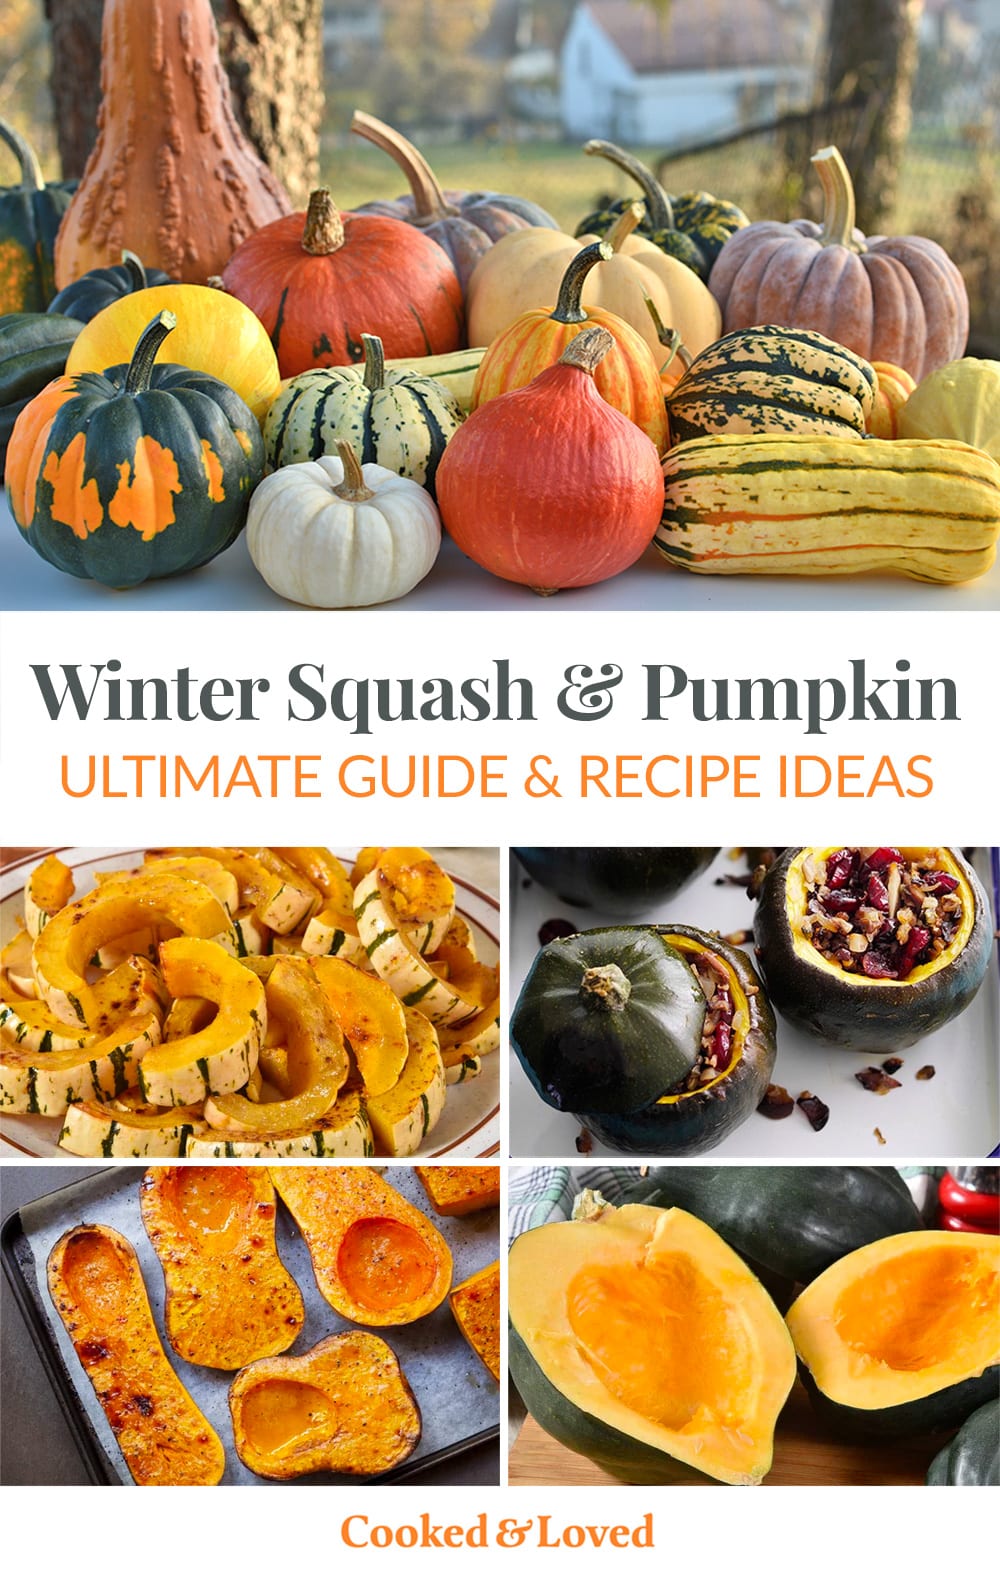 Types of Squash & Pumpkin With Recipes